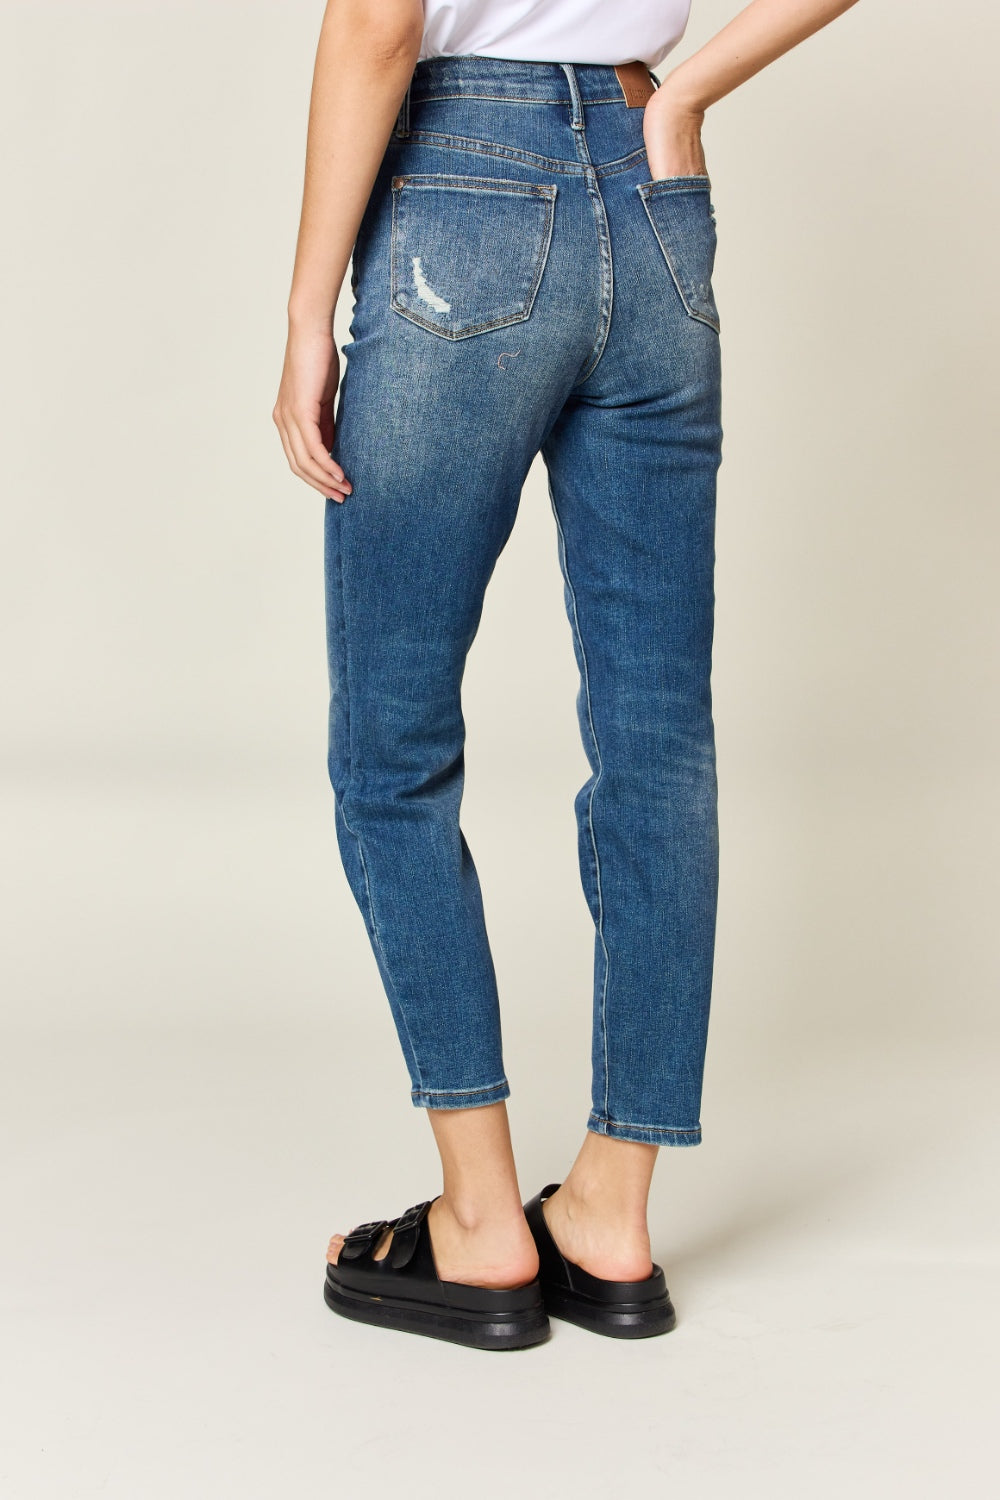 Judy Blue Full Size Tummy Control High Waist Slim Jeans-Denim-Inspired by Justeen-Women's Clothing Boutique